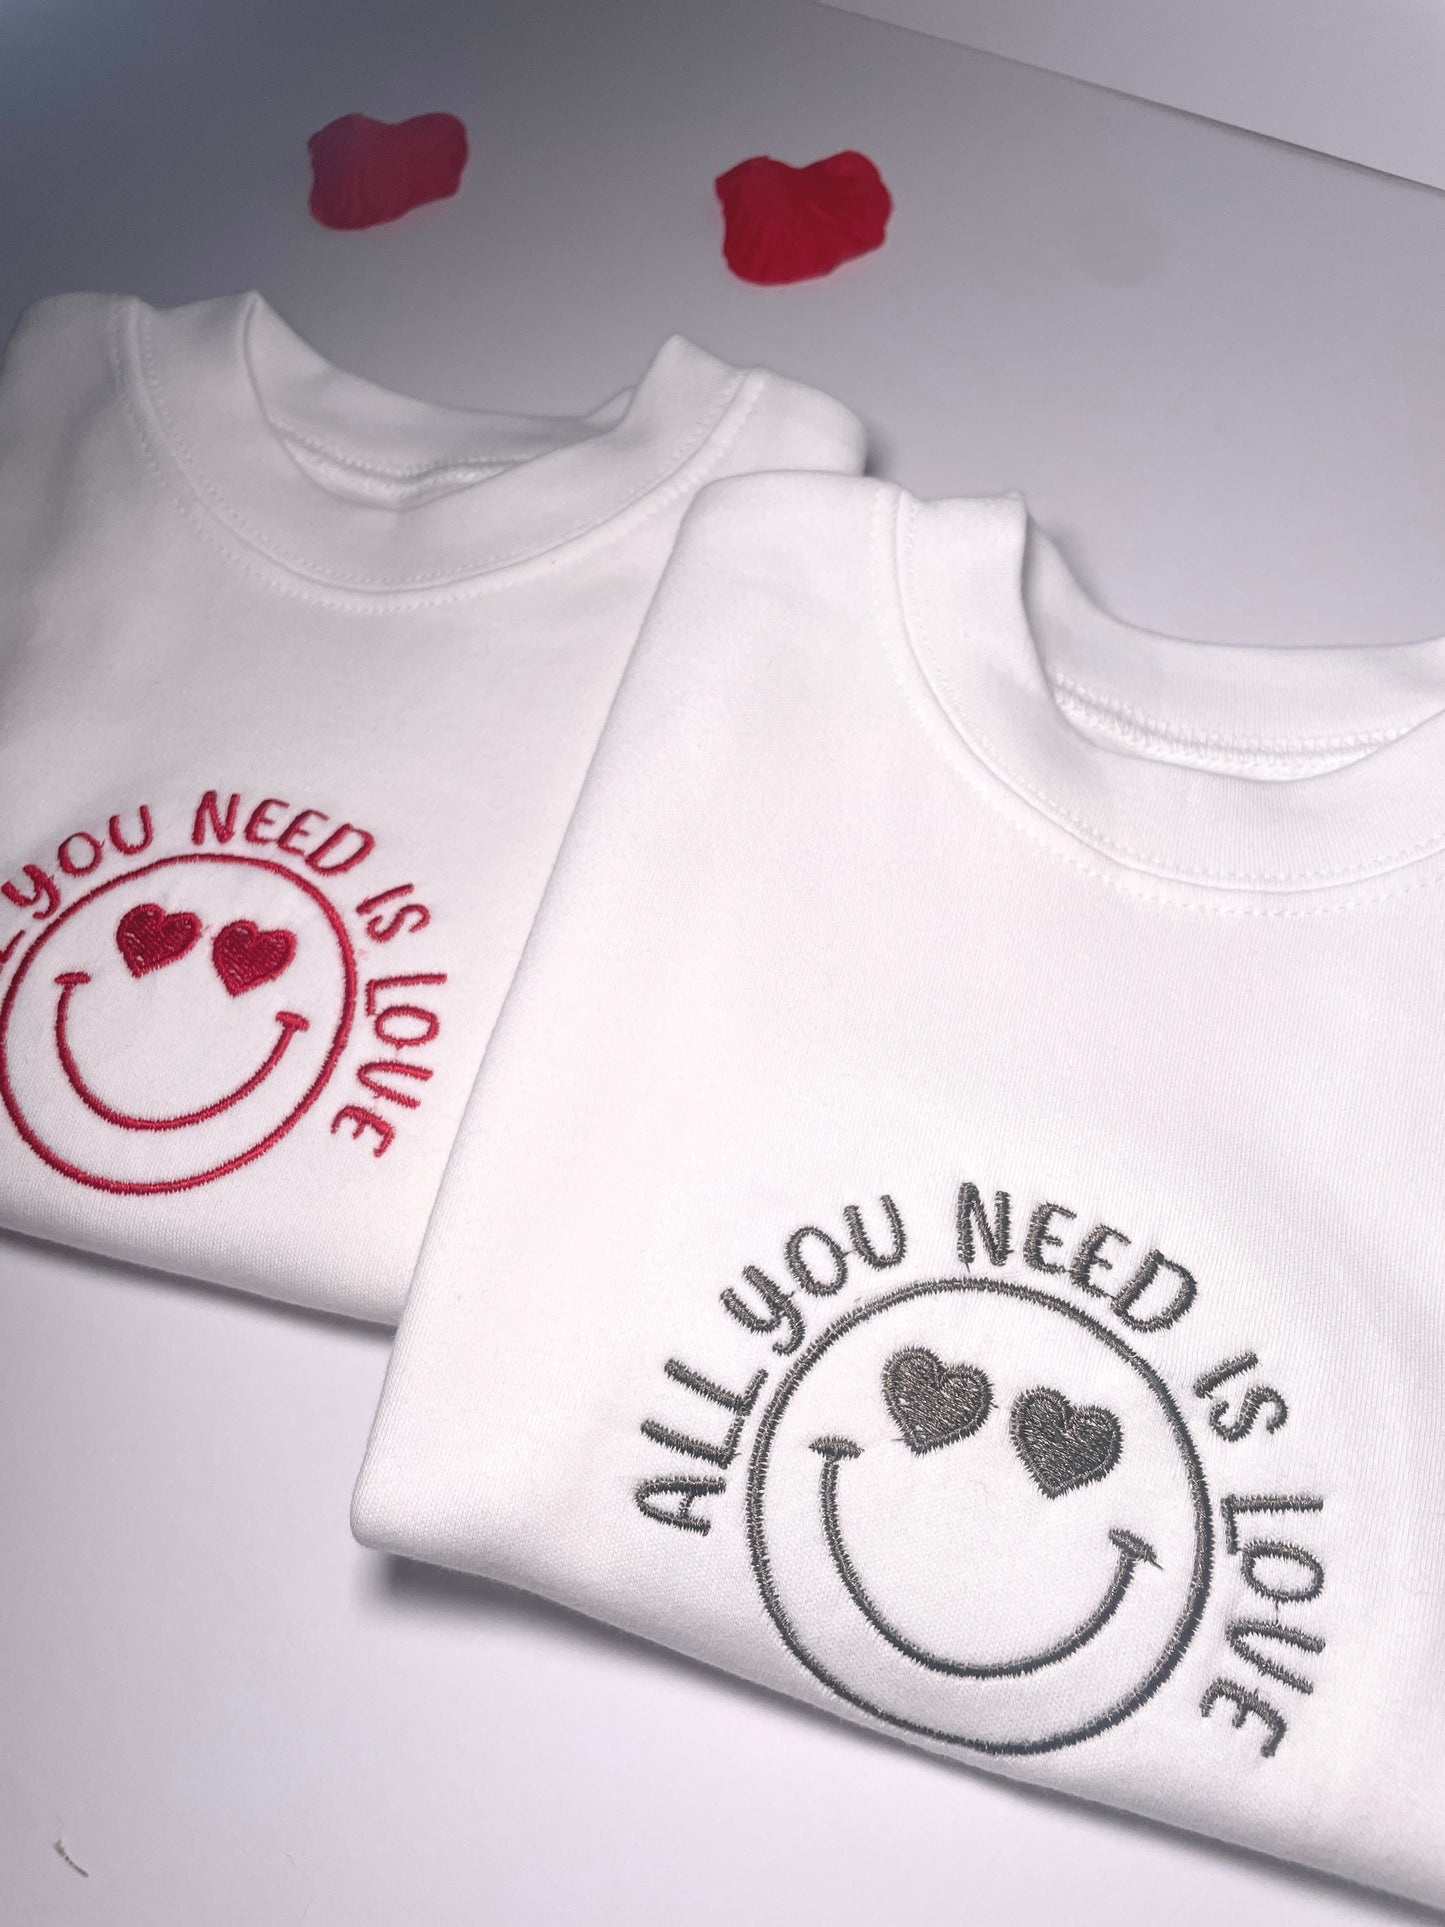 All you need is love top